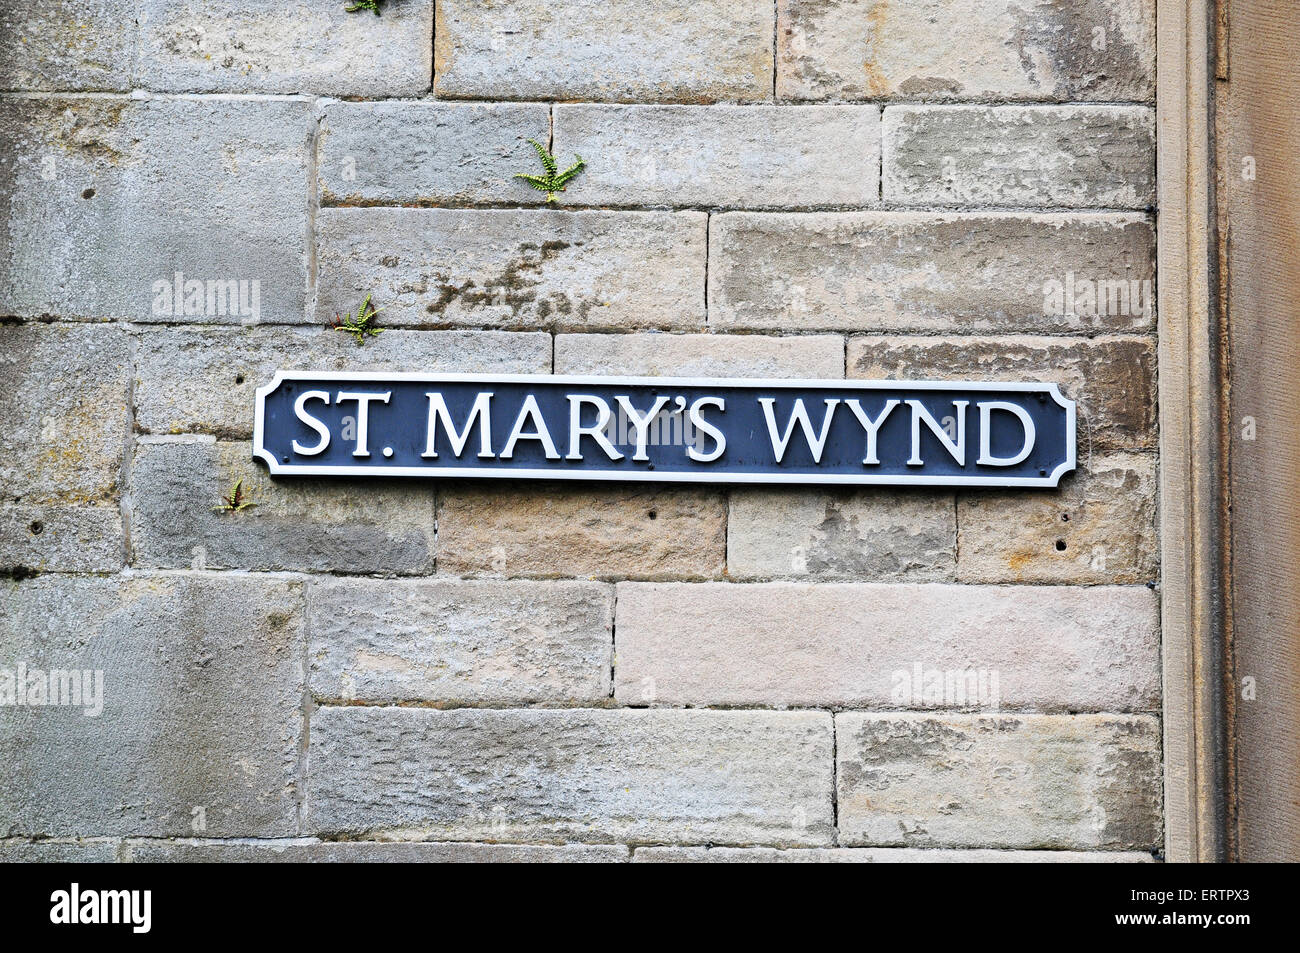 Il nome di una via, St. Mary's Wynd, in Hexham, Northumberland. Foto Stock